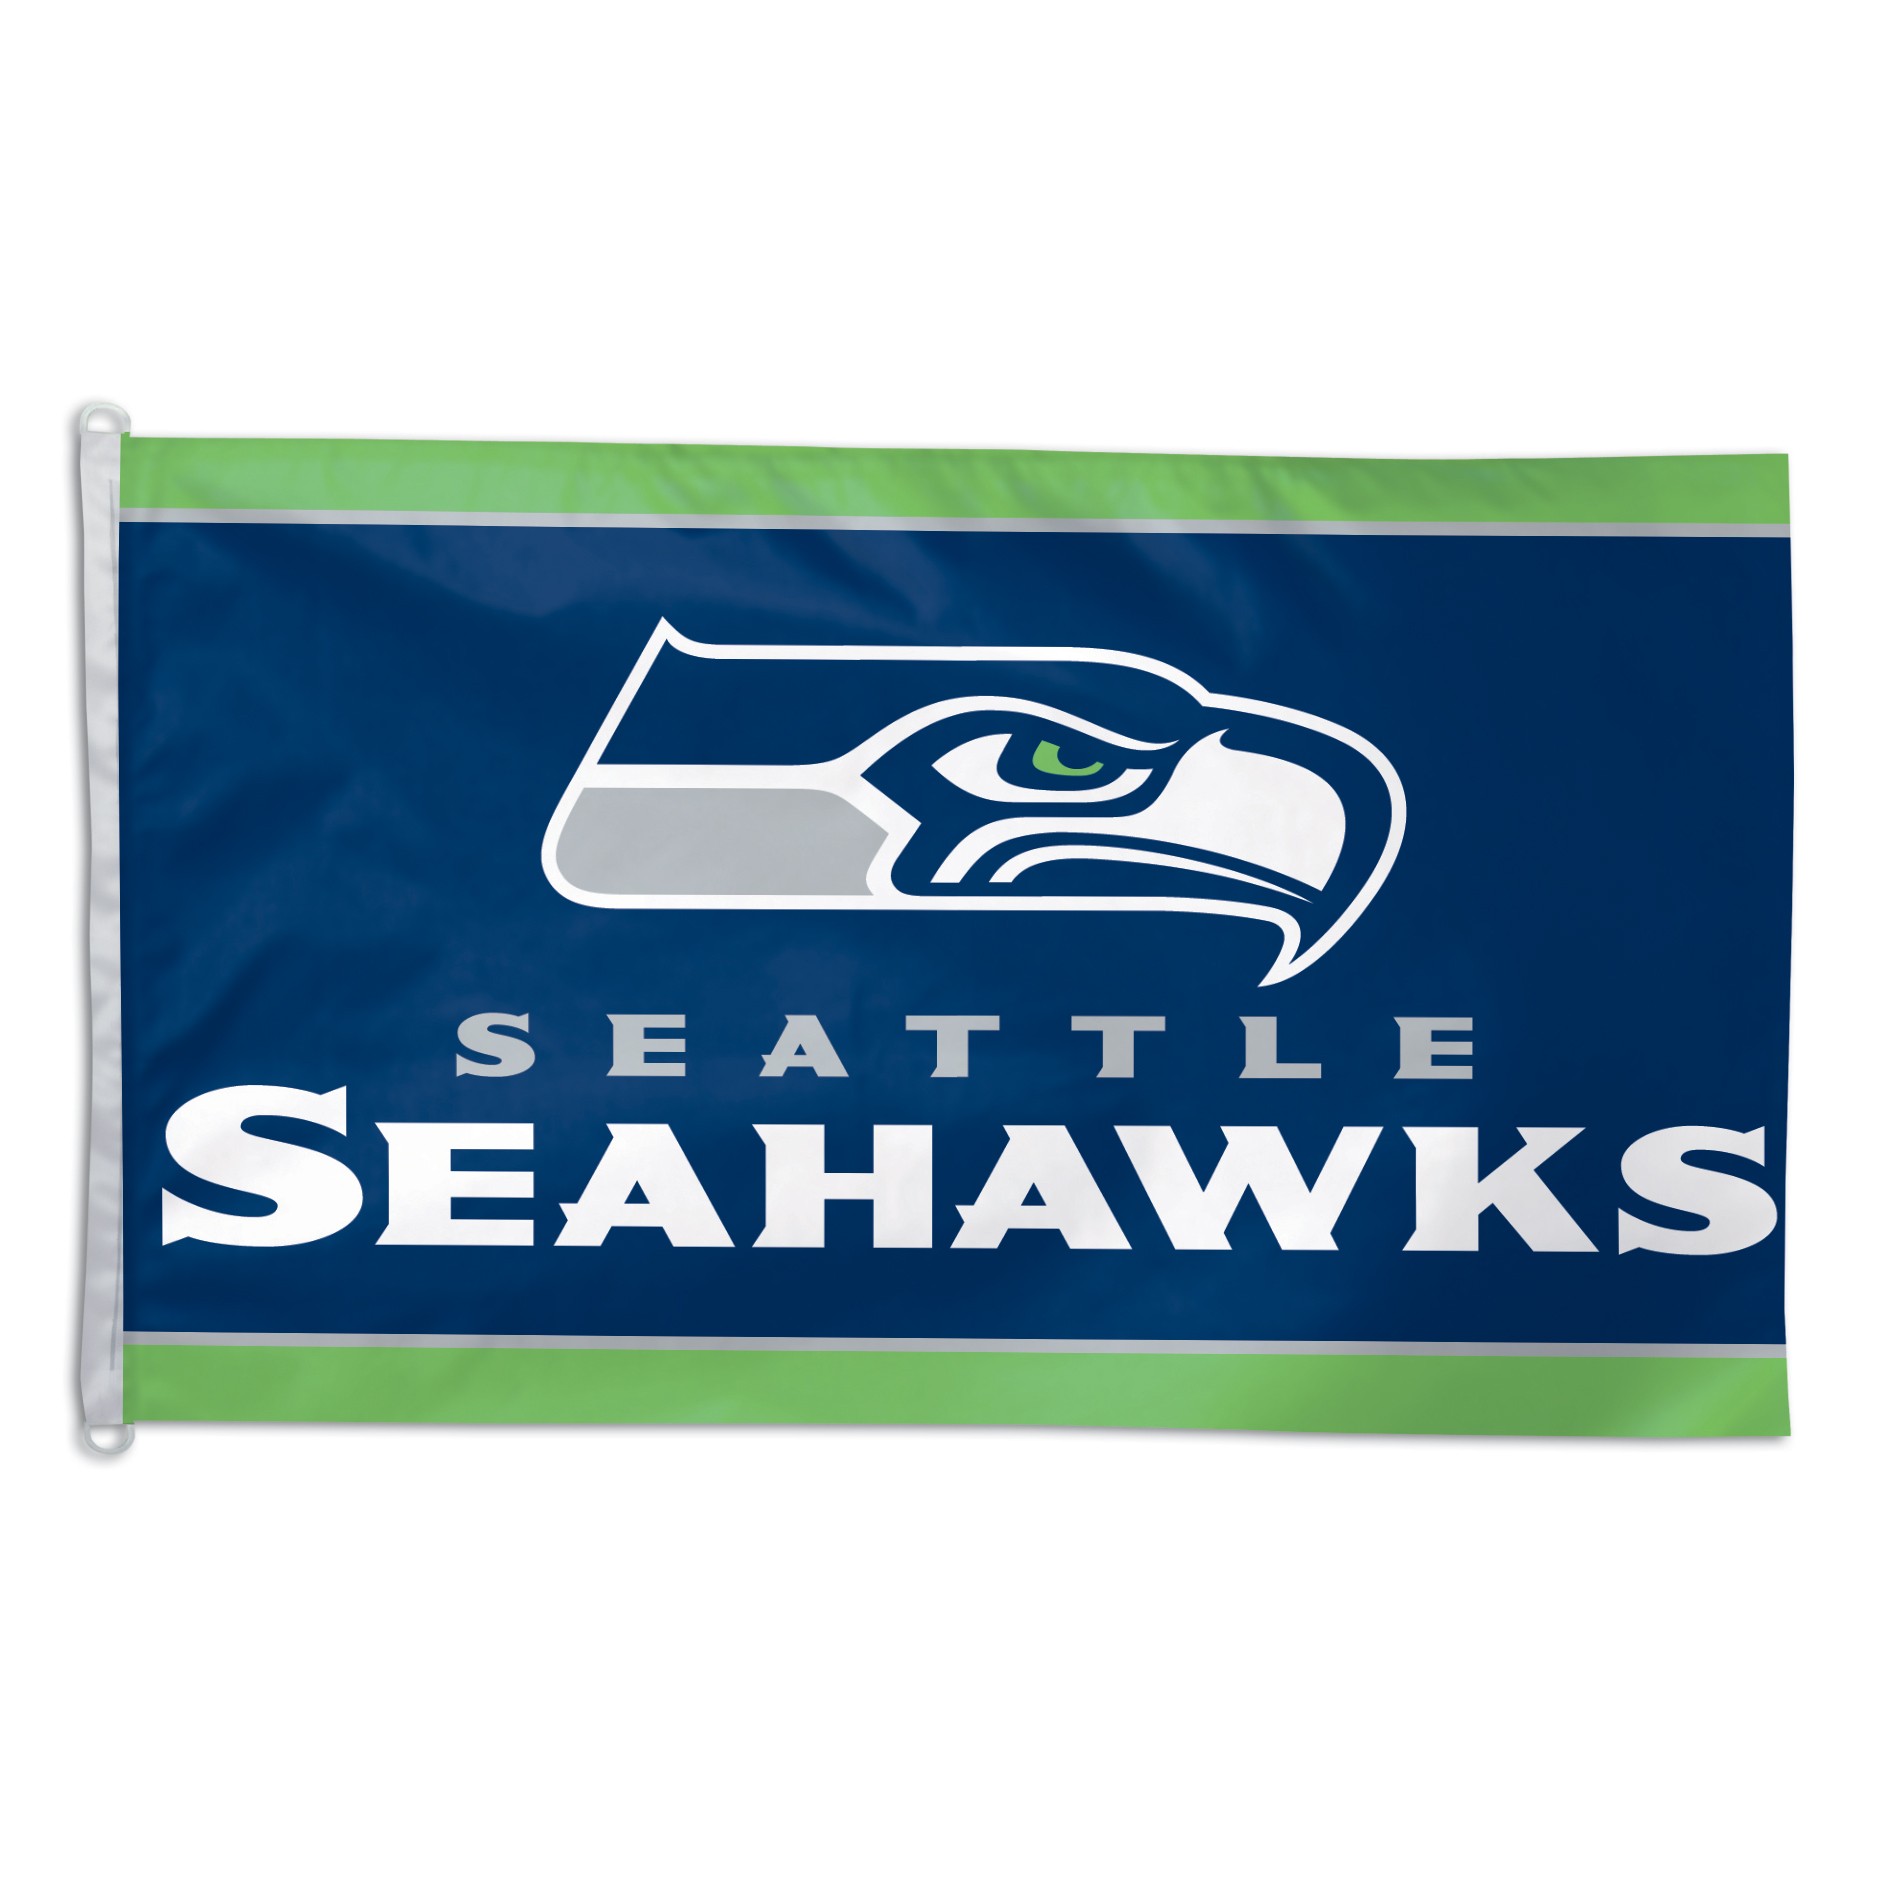 Seattle Seahawks Flags and Banners - NFL